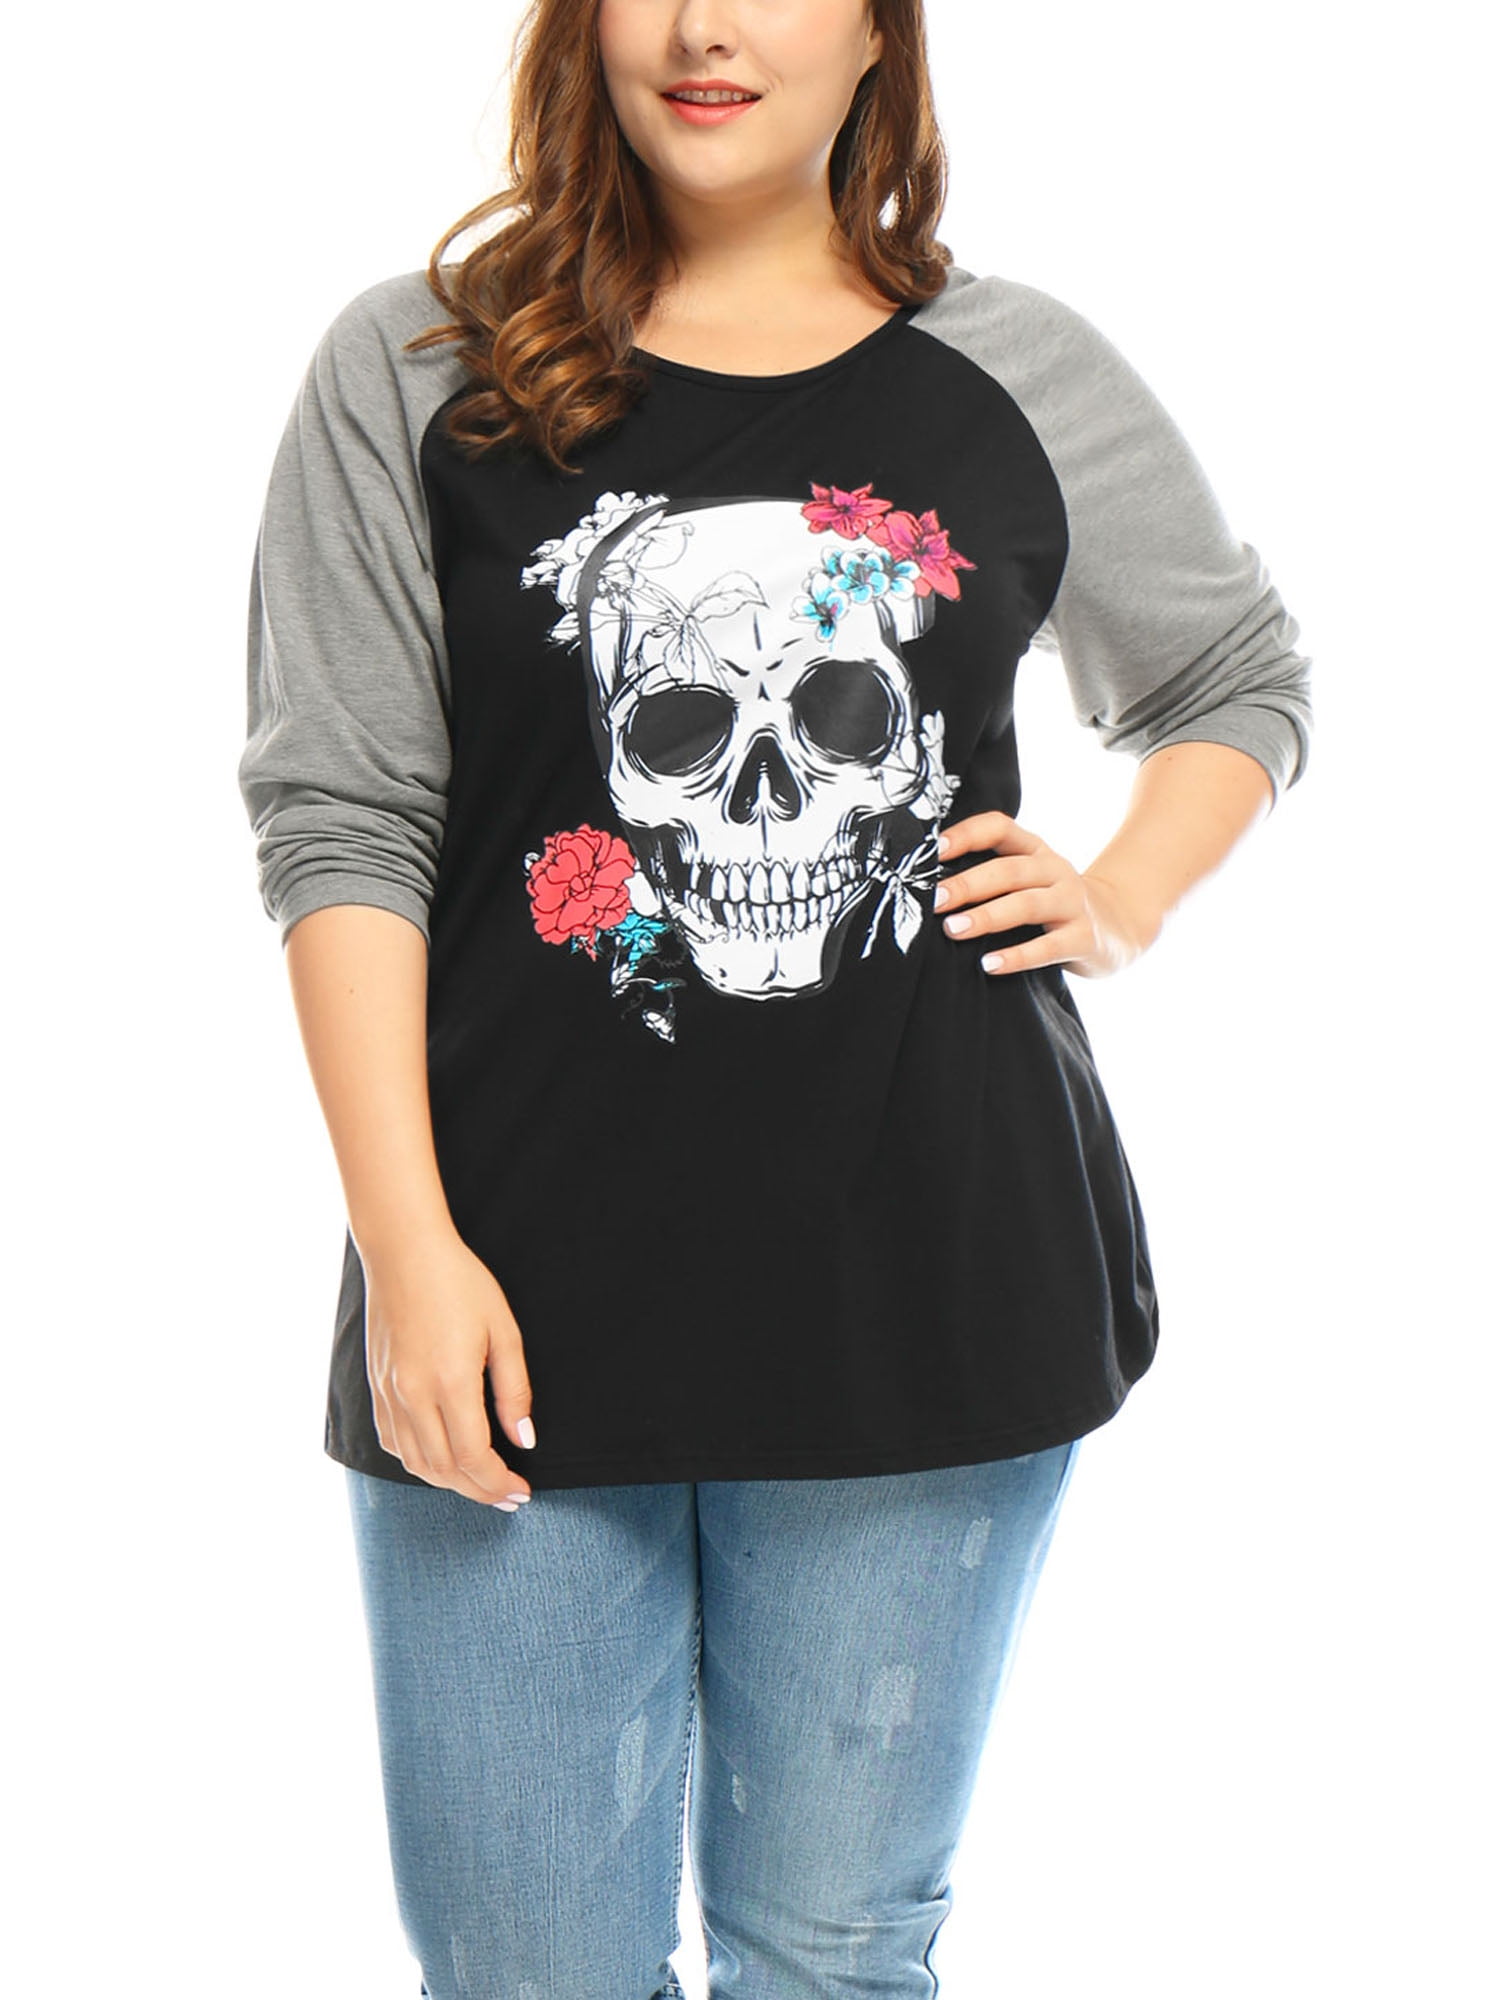 Womens Plus Size Summer Basic Short Sleeve Tops Solid Skull Print Casual Loose T-Shirts 